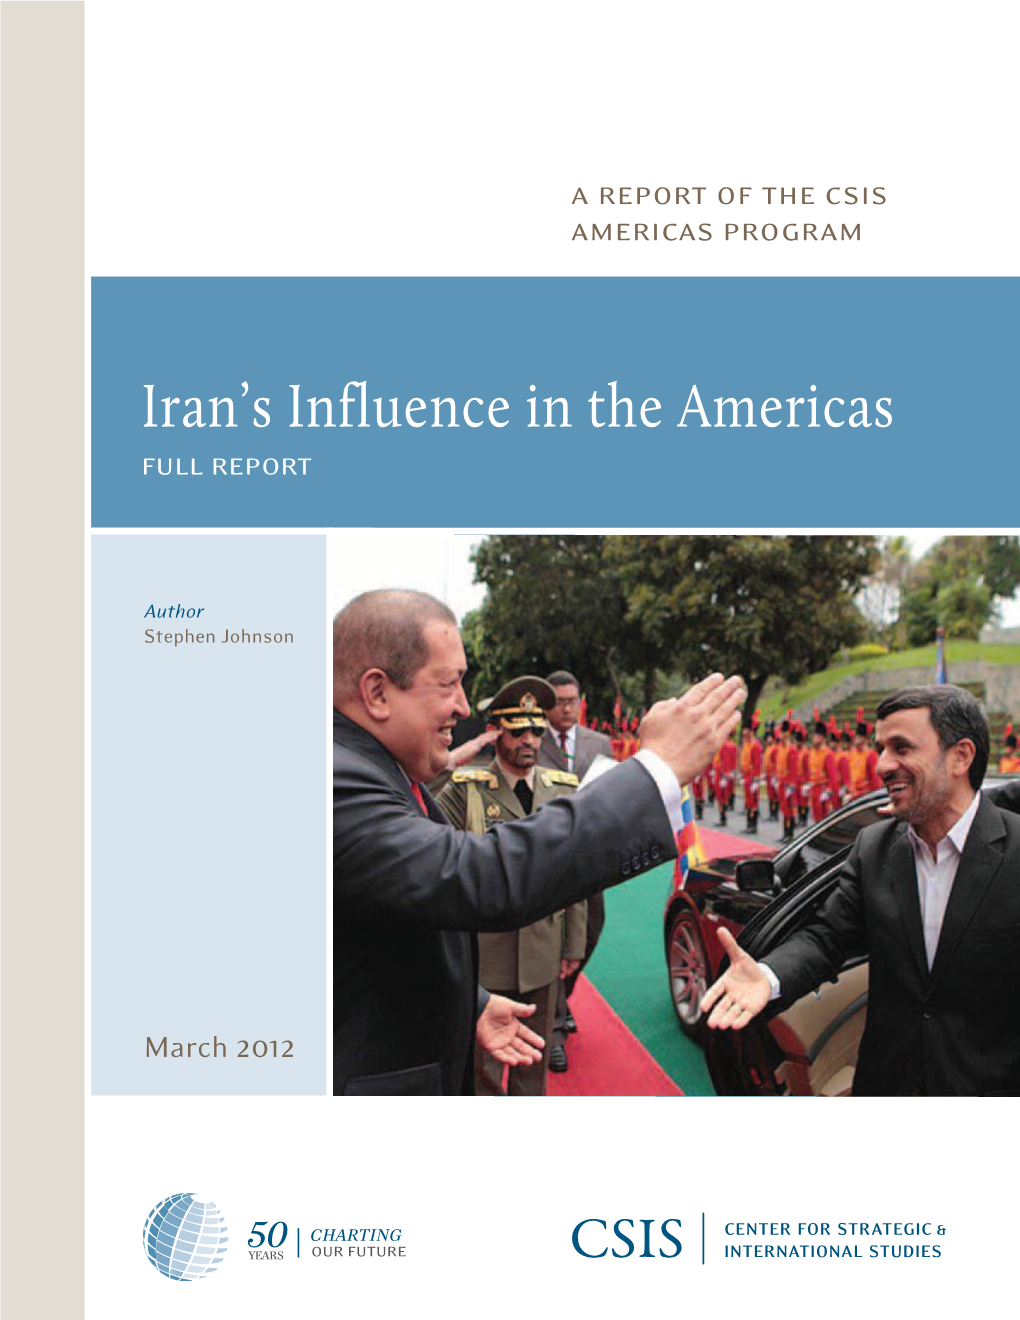 Iran's Influence in the Americas: Full Report